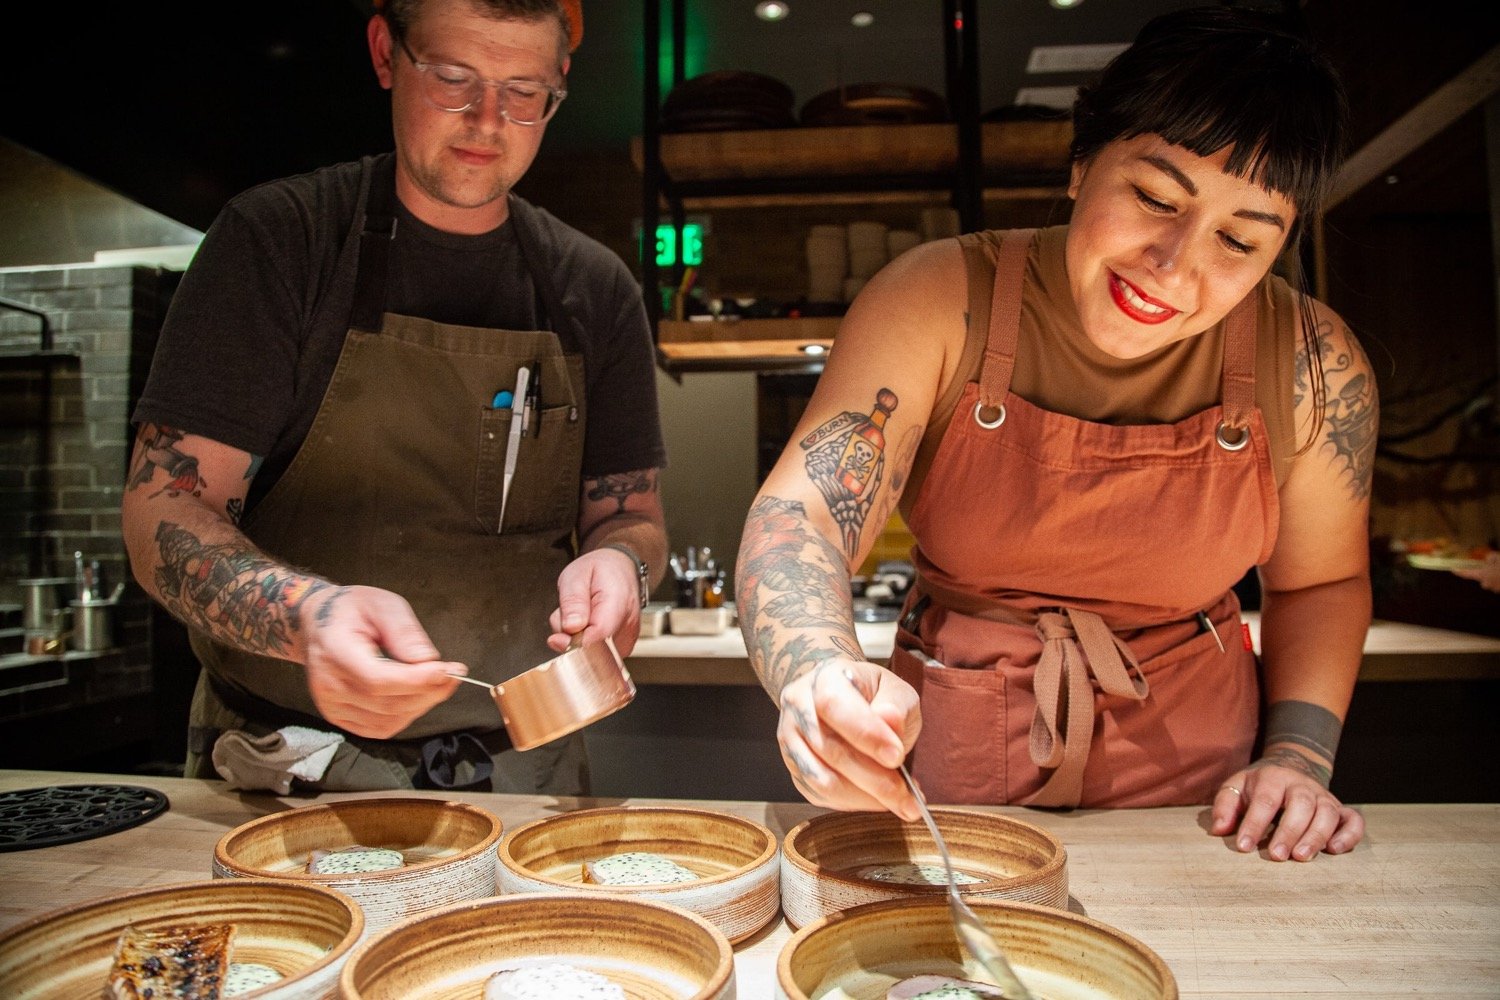 How This Roving Restaurant Concept Is Striving for Zero Waste